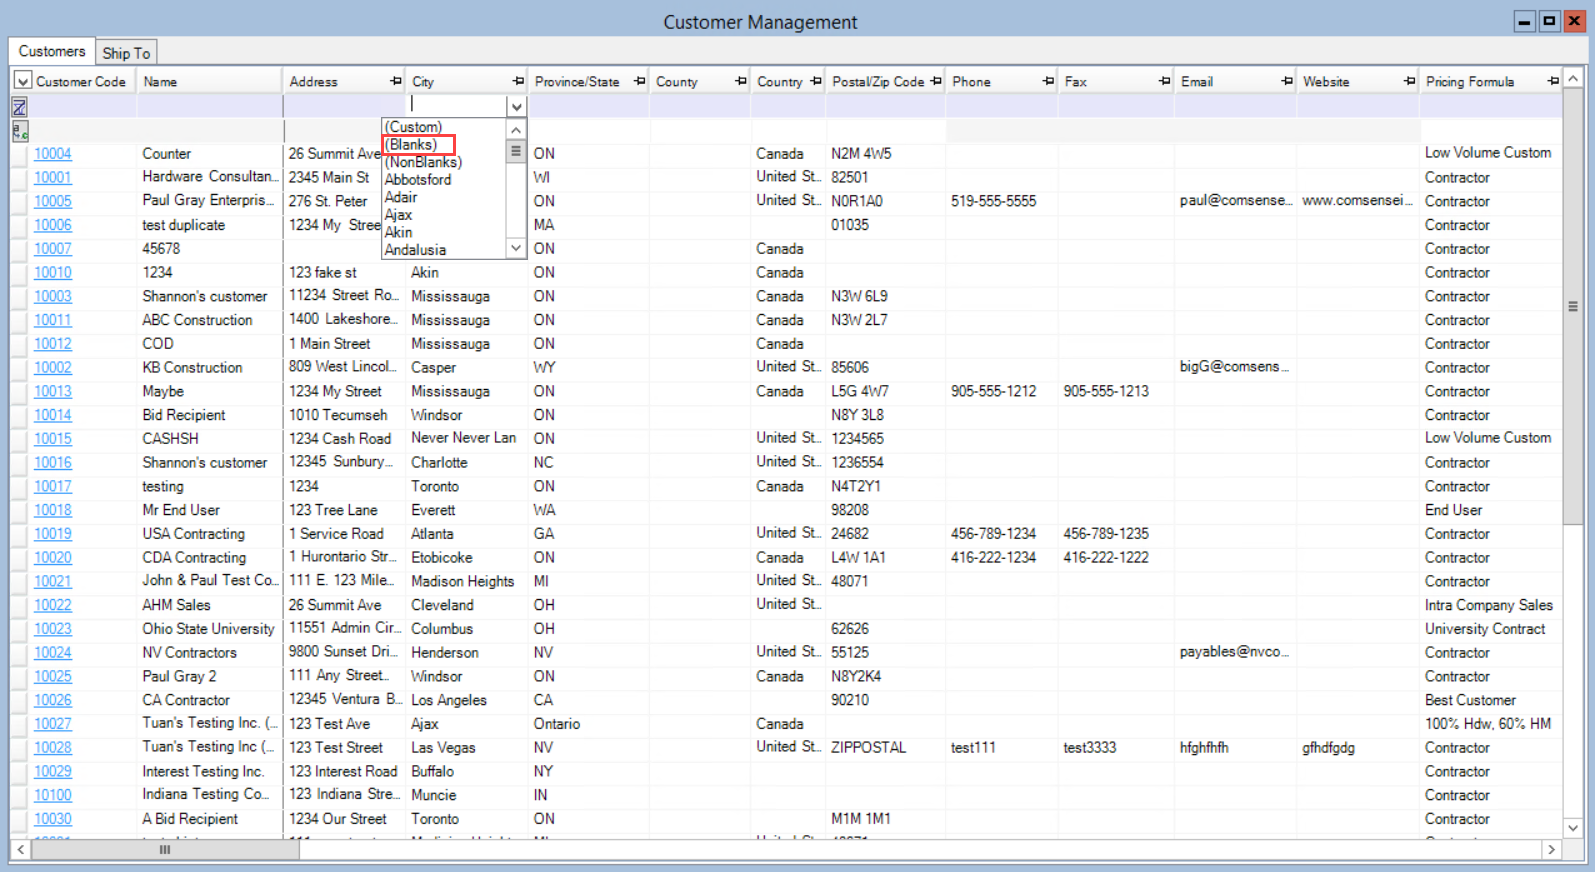 Customer Management window; shows the (Blanks) option in the filter drop-down list.